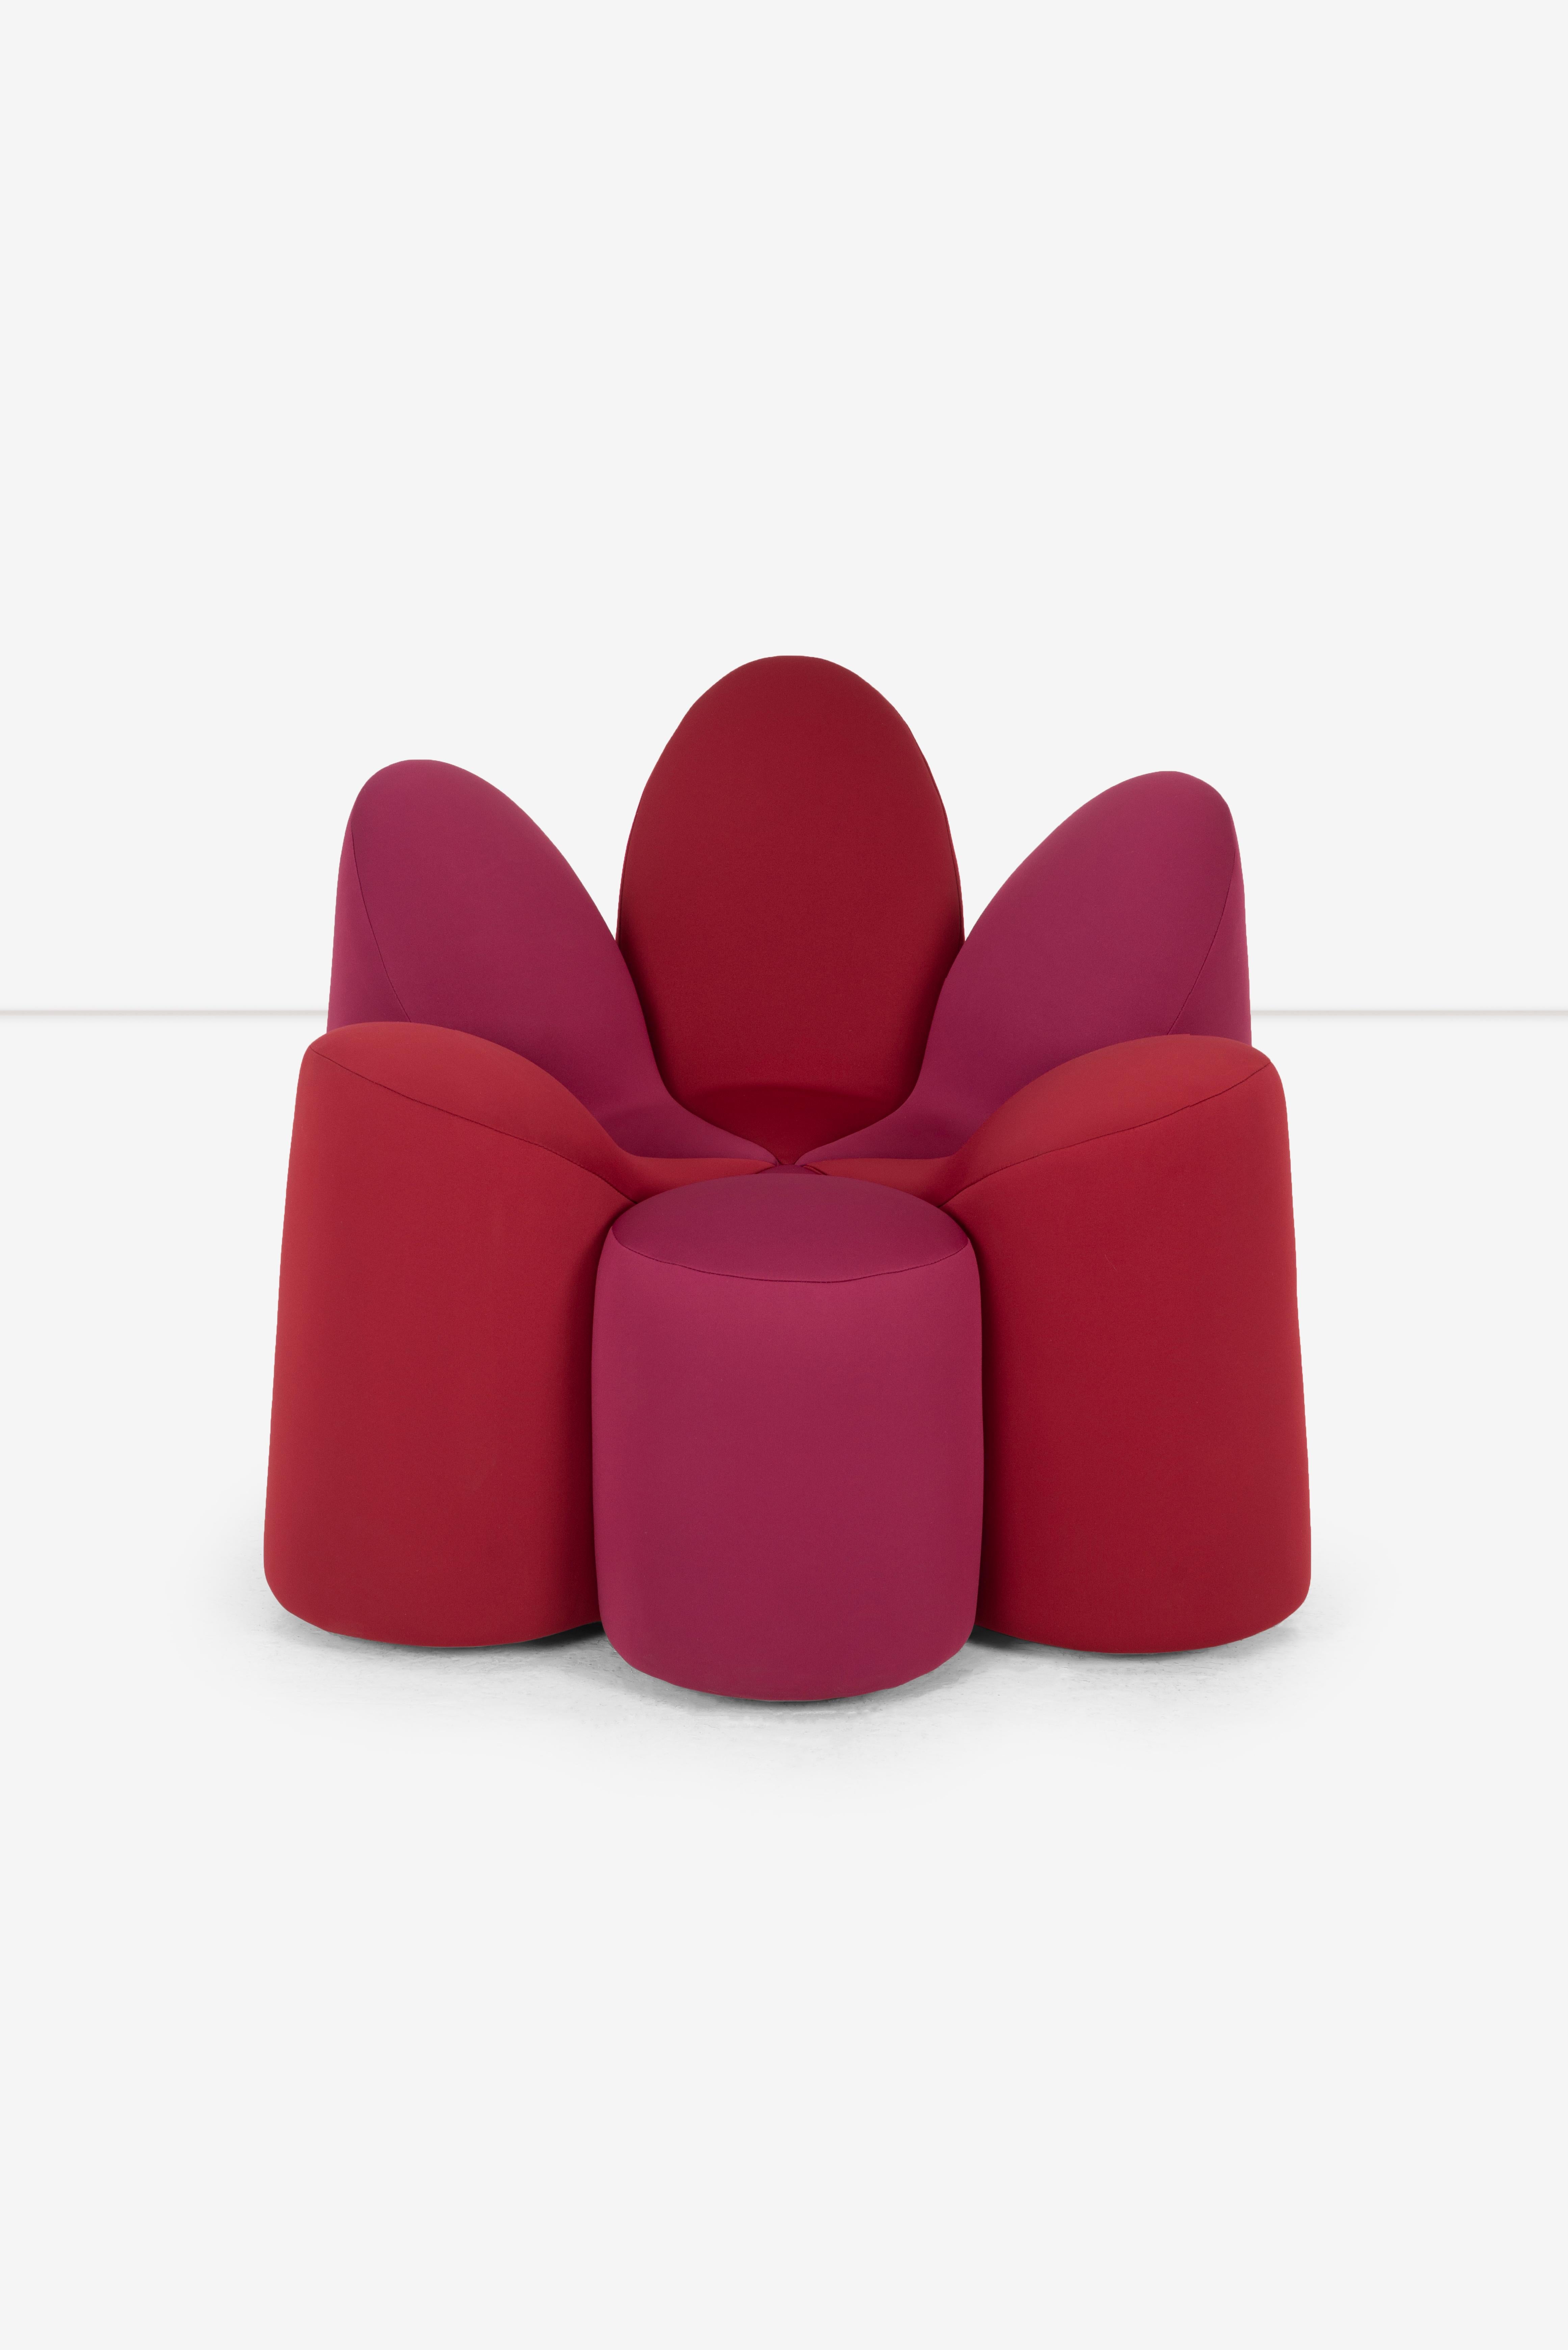 Modern Mayflower Chair by Fabrice Berrux for Roche Bobois For Sale